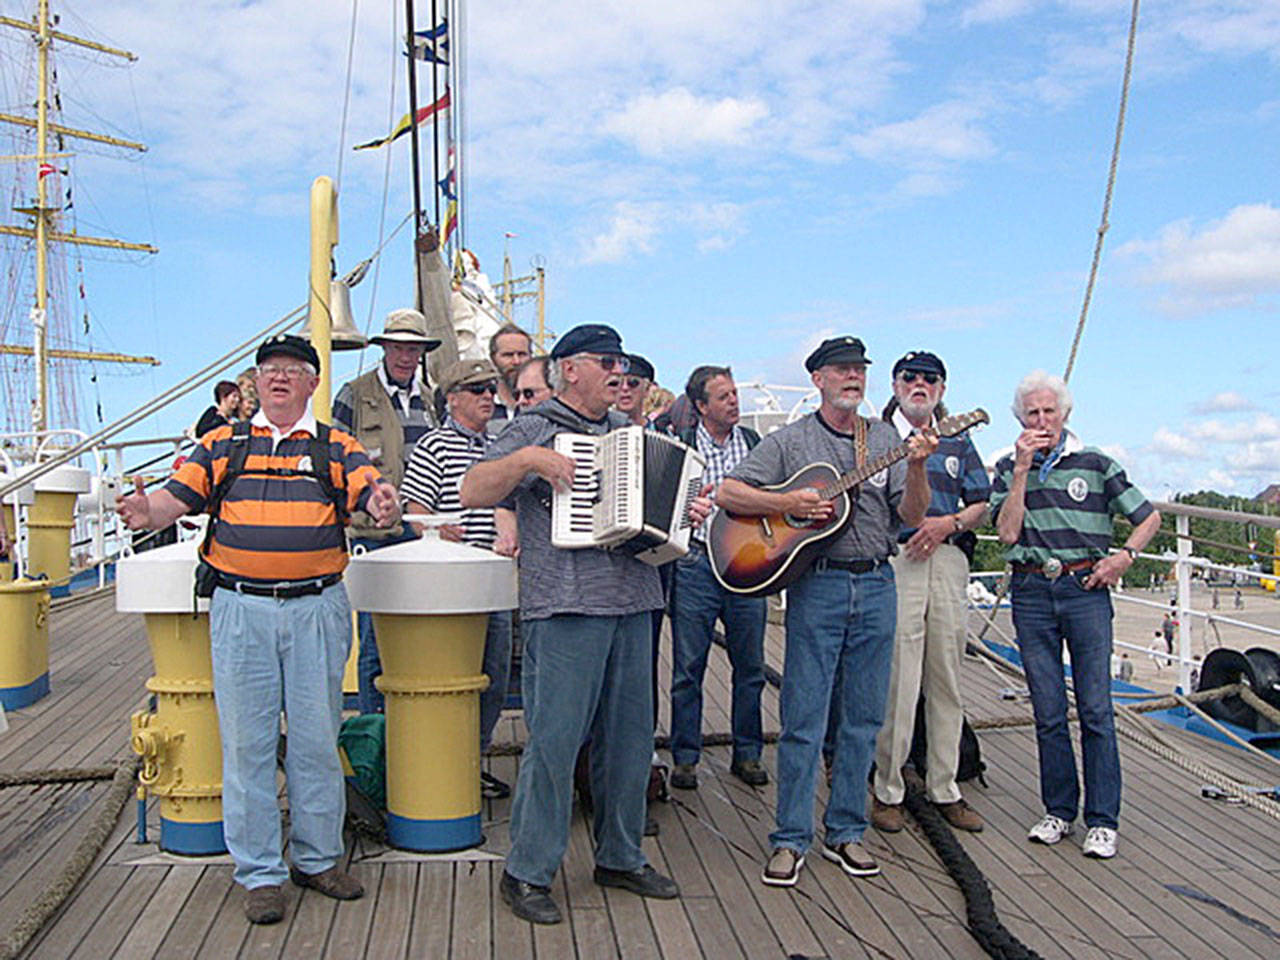 Photo provided                                The Shifty Sailors play at the Tall Ship Festival in Riga, Latvia in 2003 aboard the German sailing vessel Seute Deern. Pictured are Jim Amis, Mike Thelen, Wylie Vracin, Karl Olsen, Clarke Harvey, Vern Olsen (accordion), Ray Loe, Bruce Bardwell, Denny Armstrong (guitar), Jack Moeller and Peter Lawl.